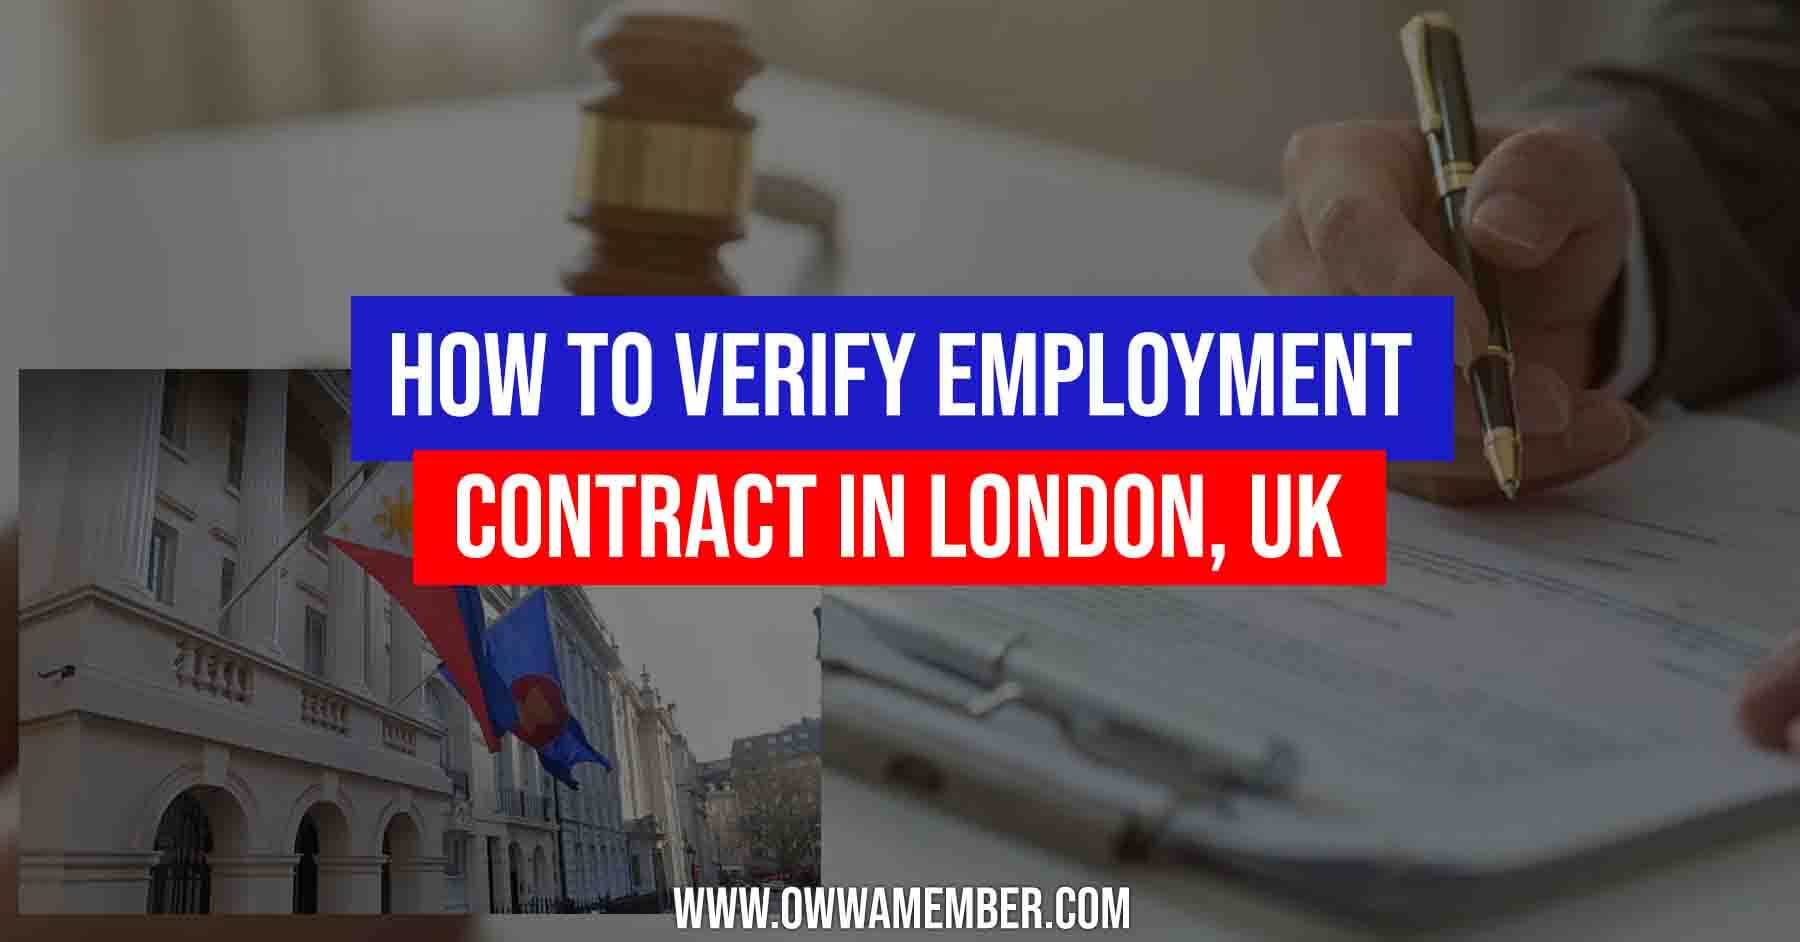 contract verification process in london uk